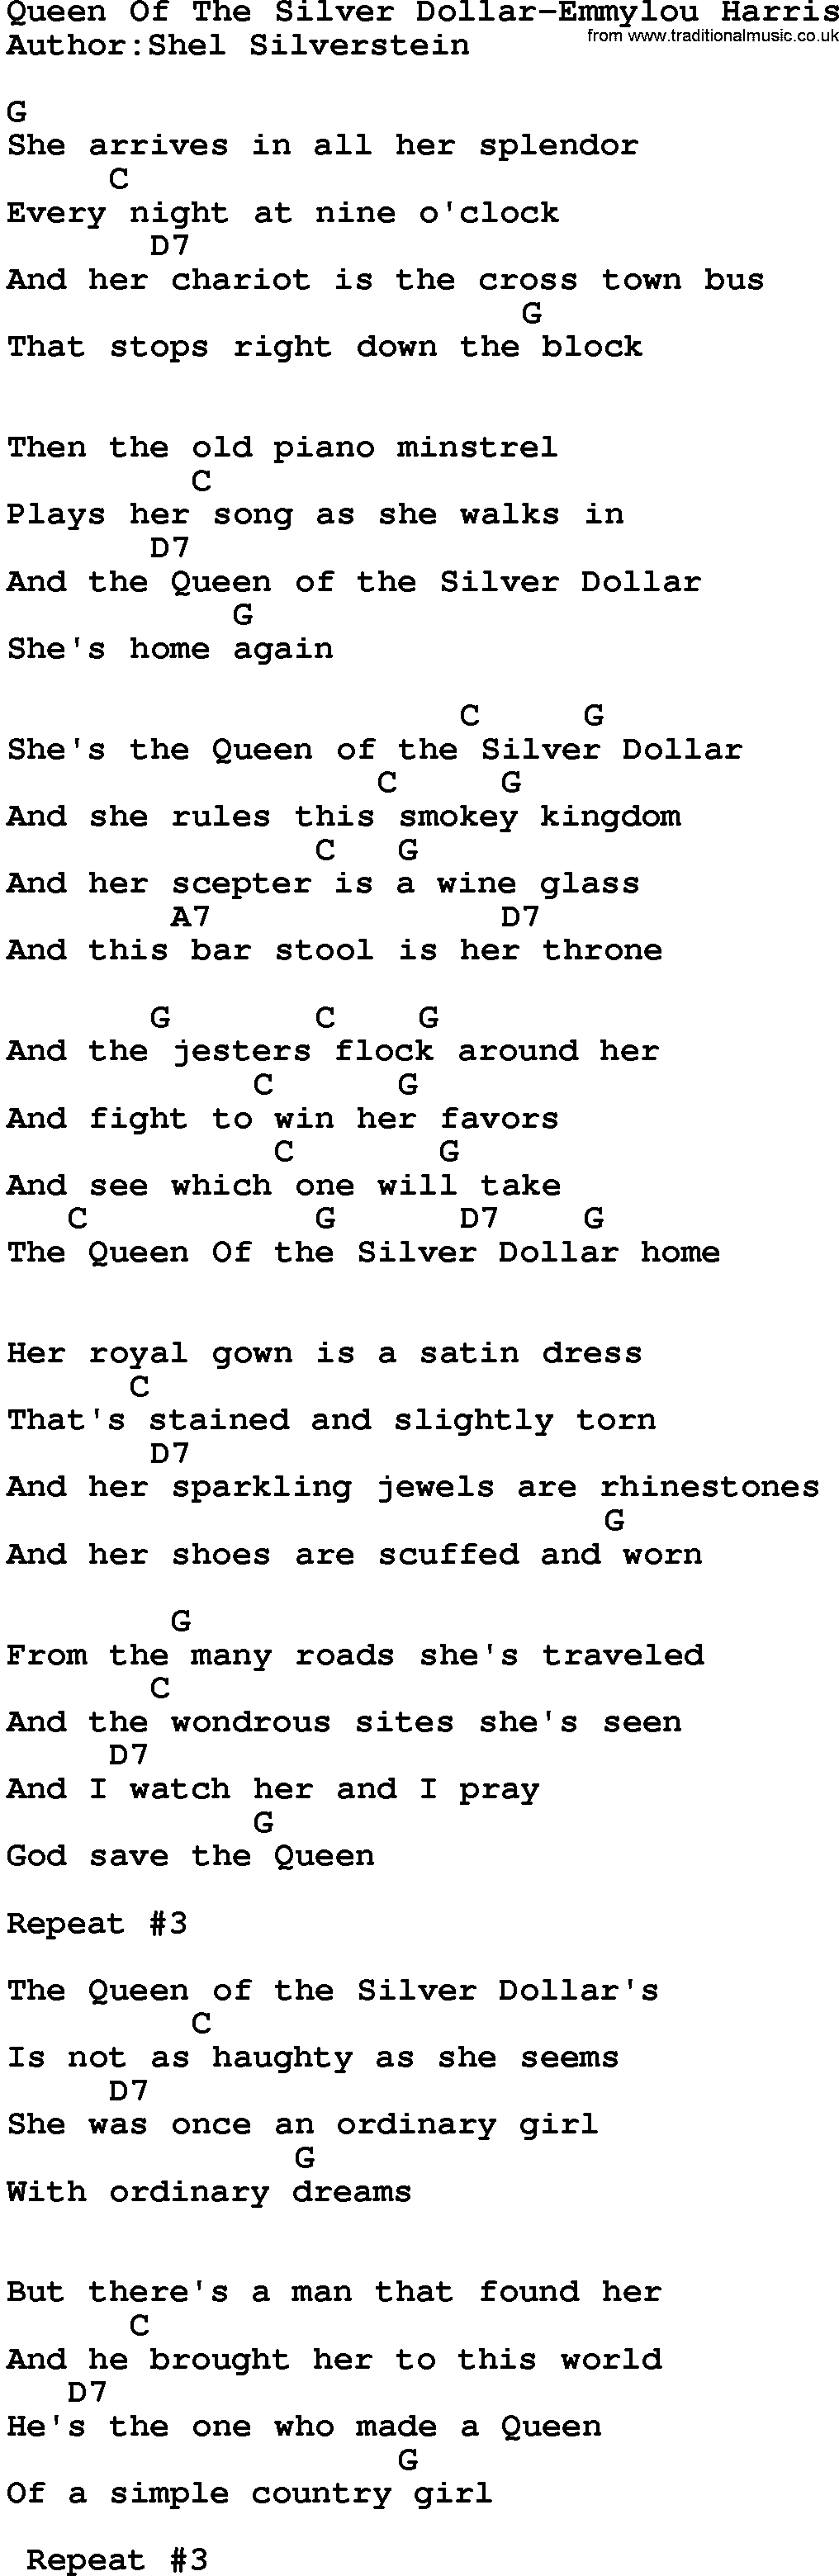 Country music song: Queen Of The Silver Dollar-Emmylou Harris lyrics and chords